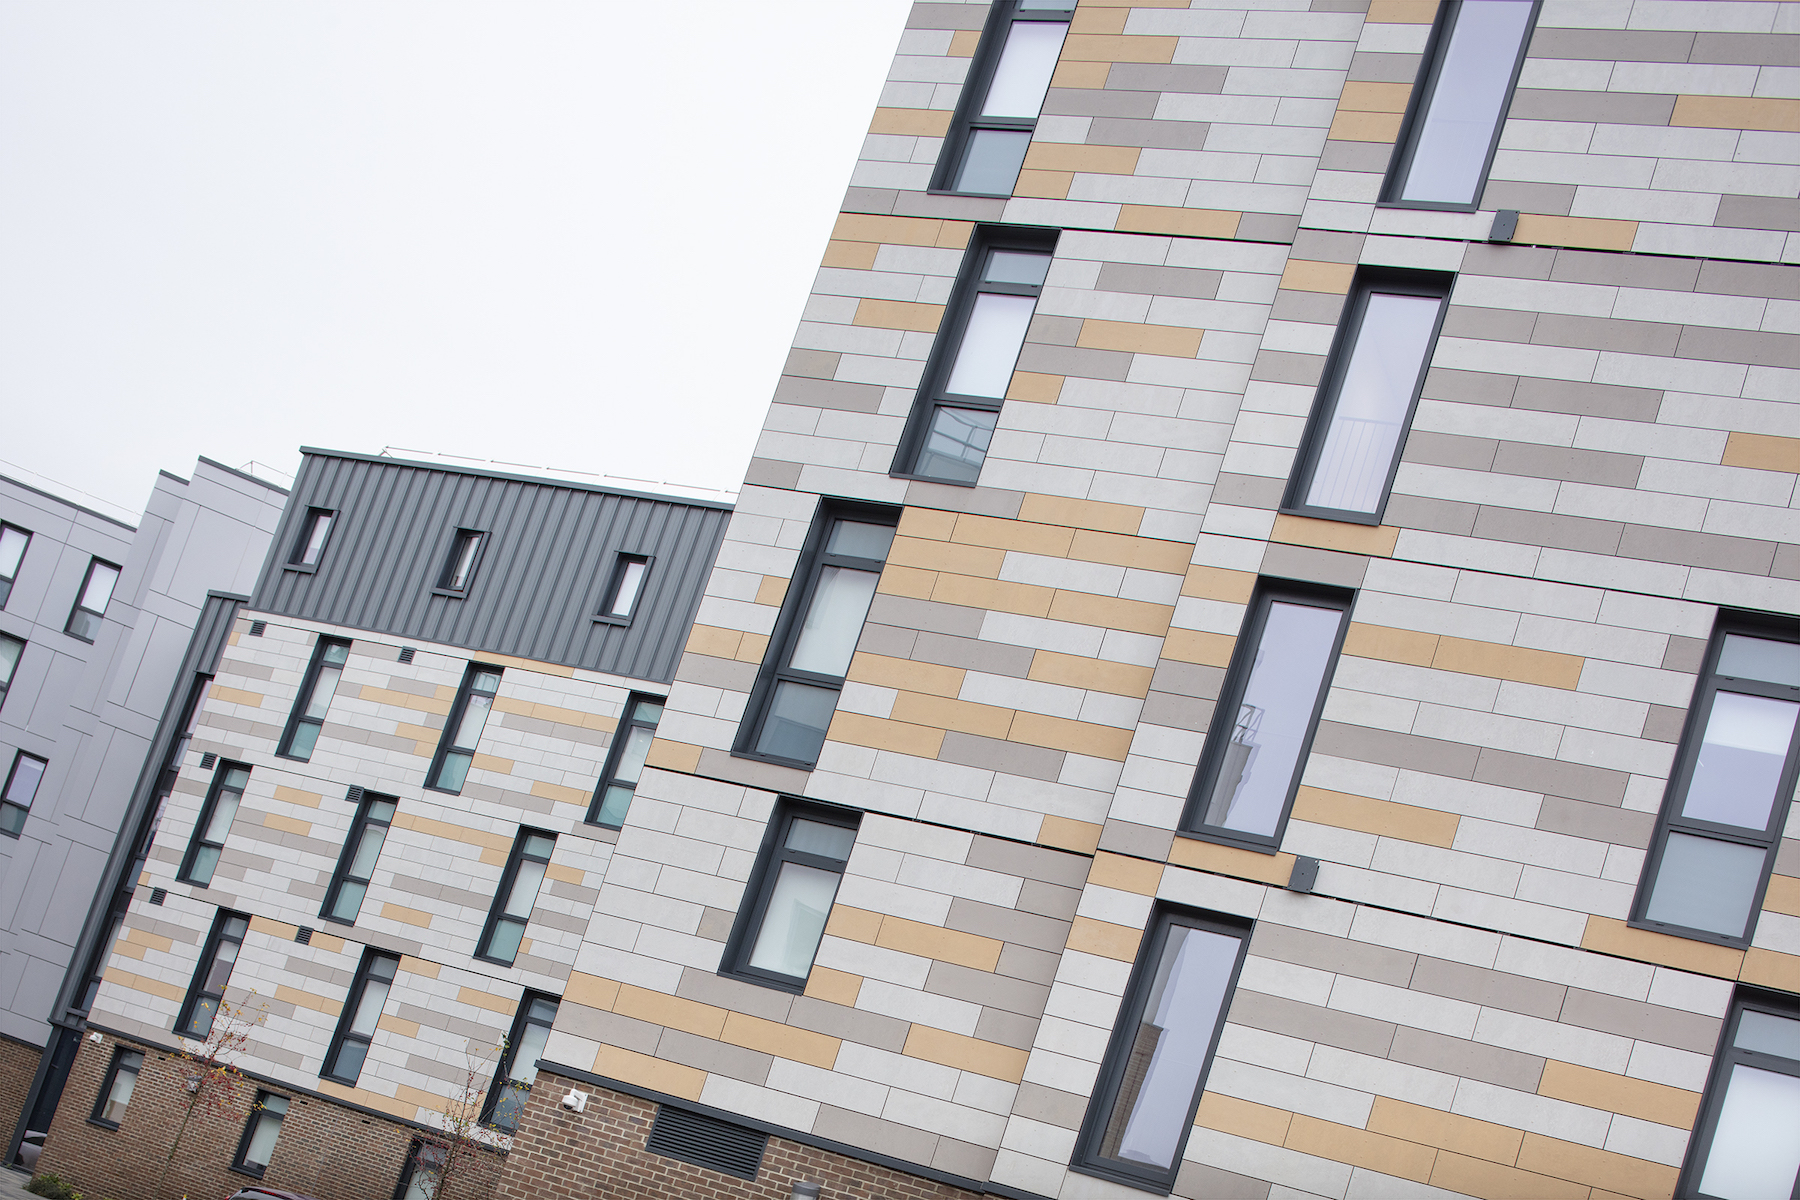 Technical curtain walling specified for Newcastle student accommodation